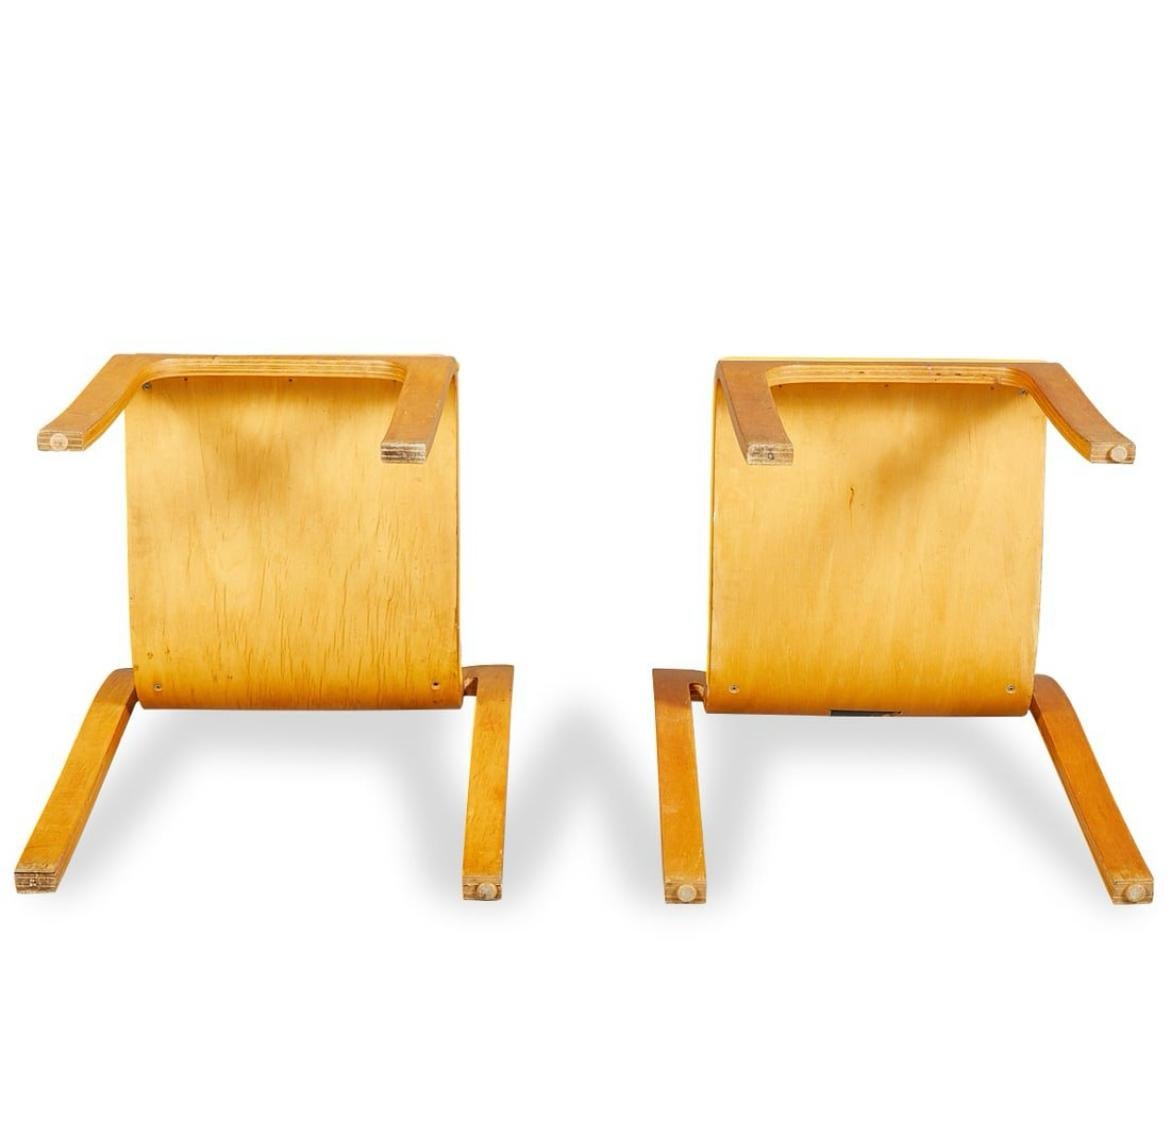 4 Peter Danko Design Mid Century Modern Bodyform Chairs Bent Wood In Good Condition For Sale In BROOKLYN, NY